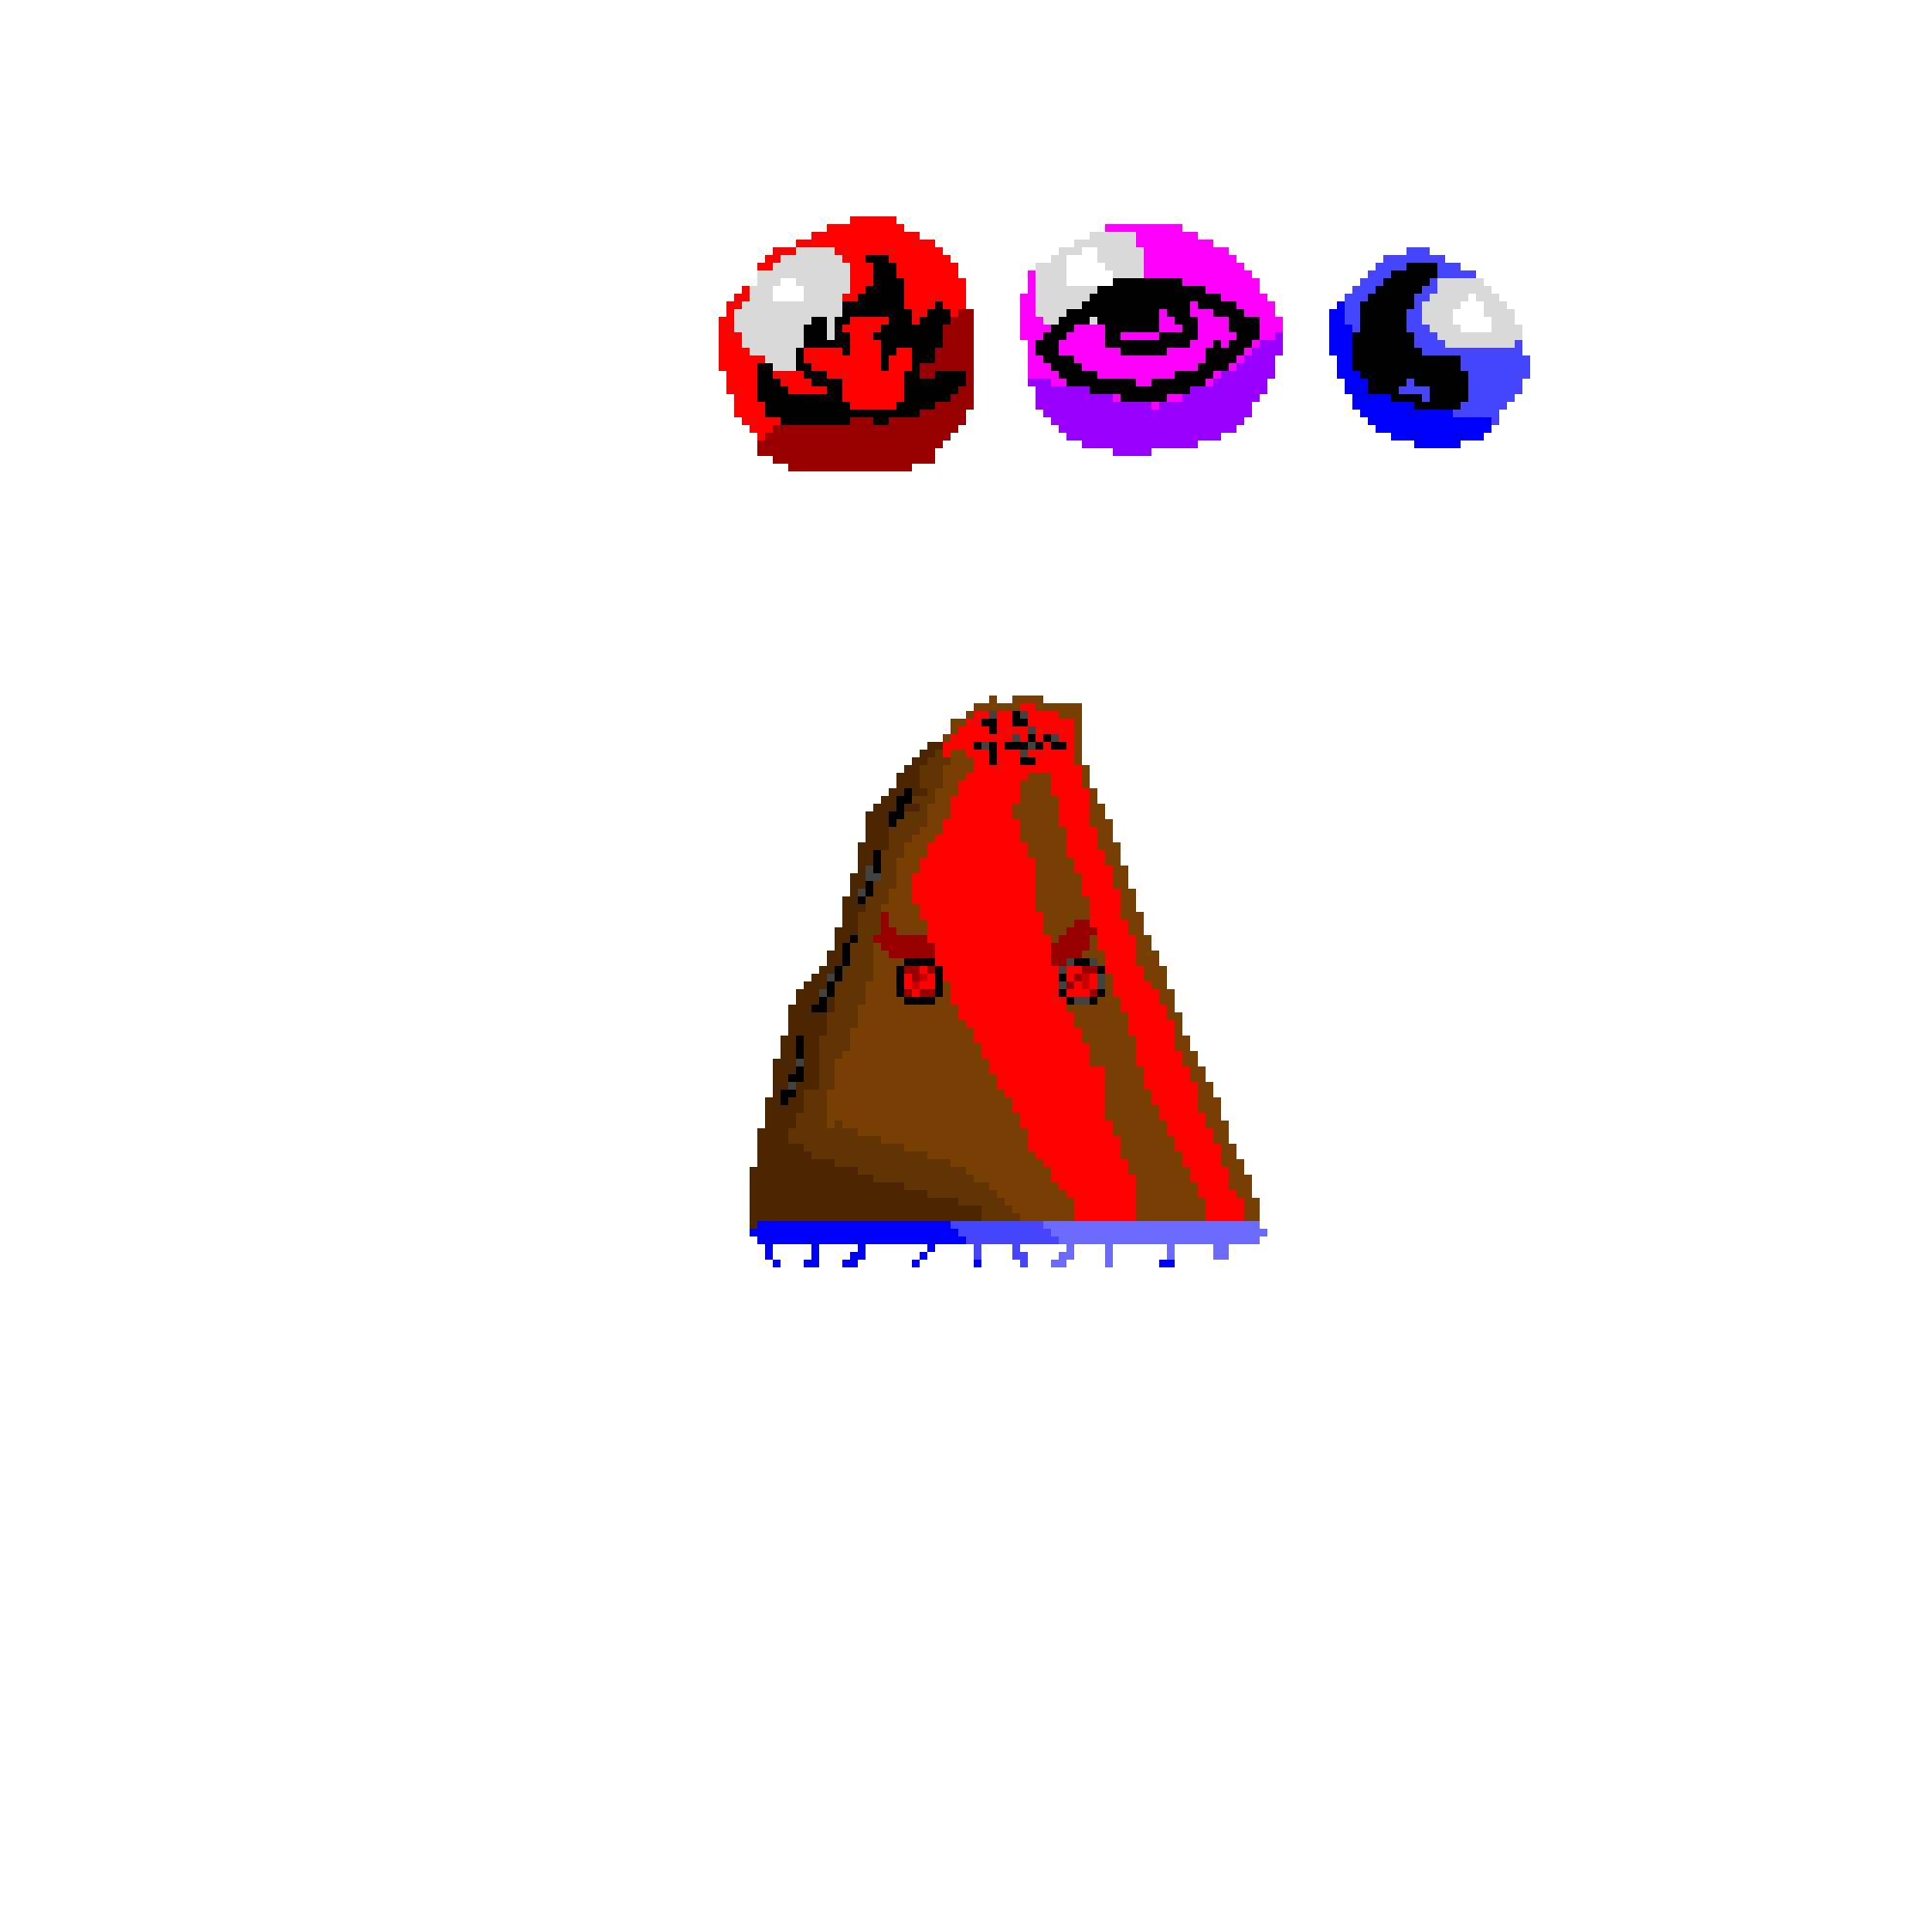 Volma, a pokemon i made in elementary shcool, its fire, psychic (it moves by floating), and water.